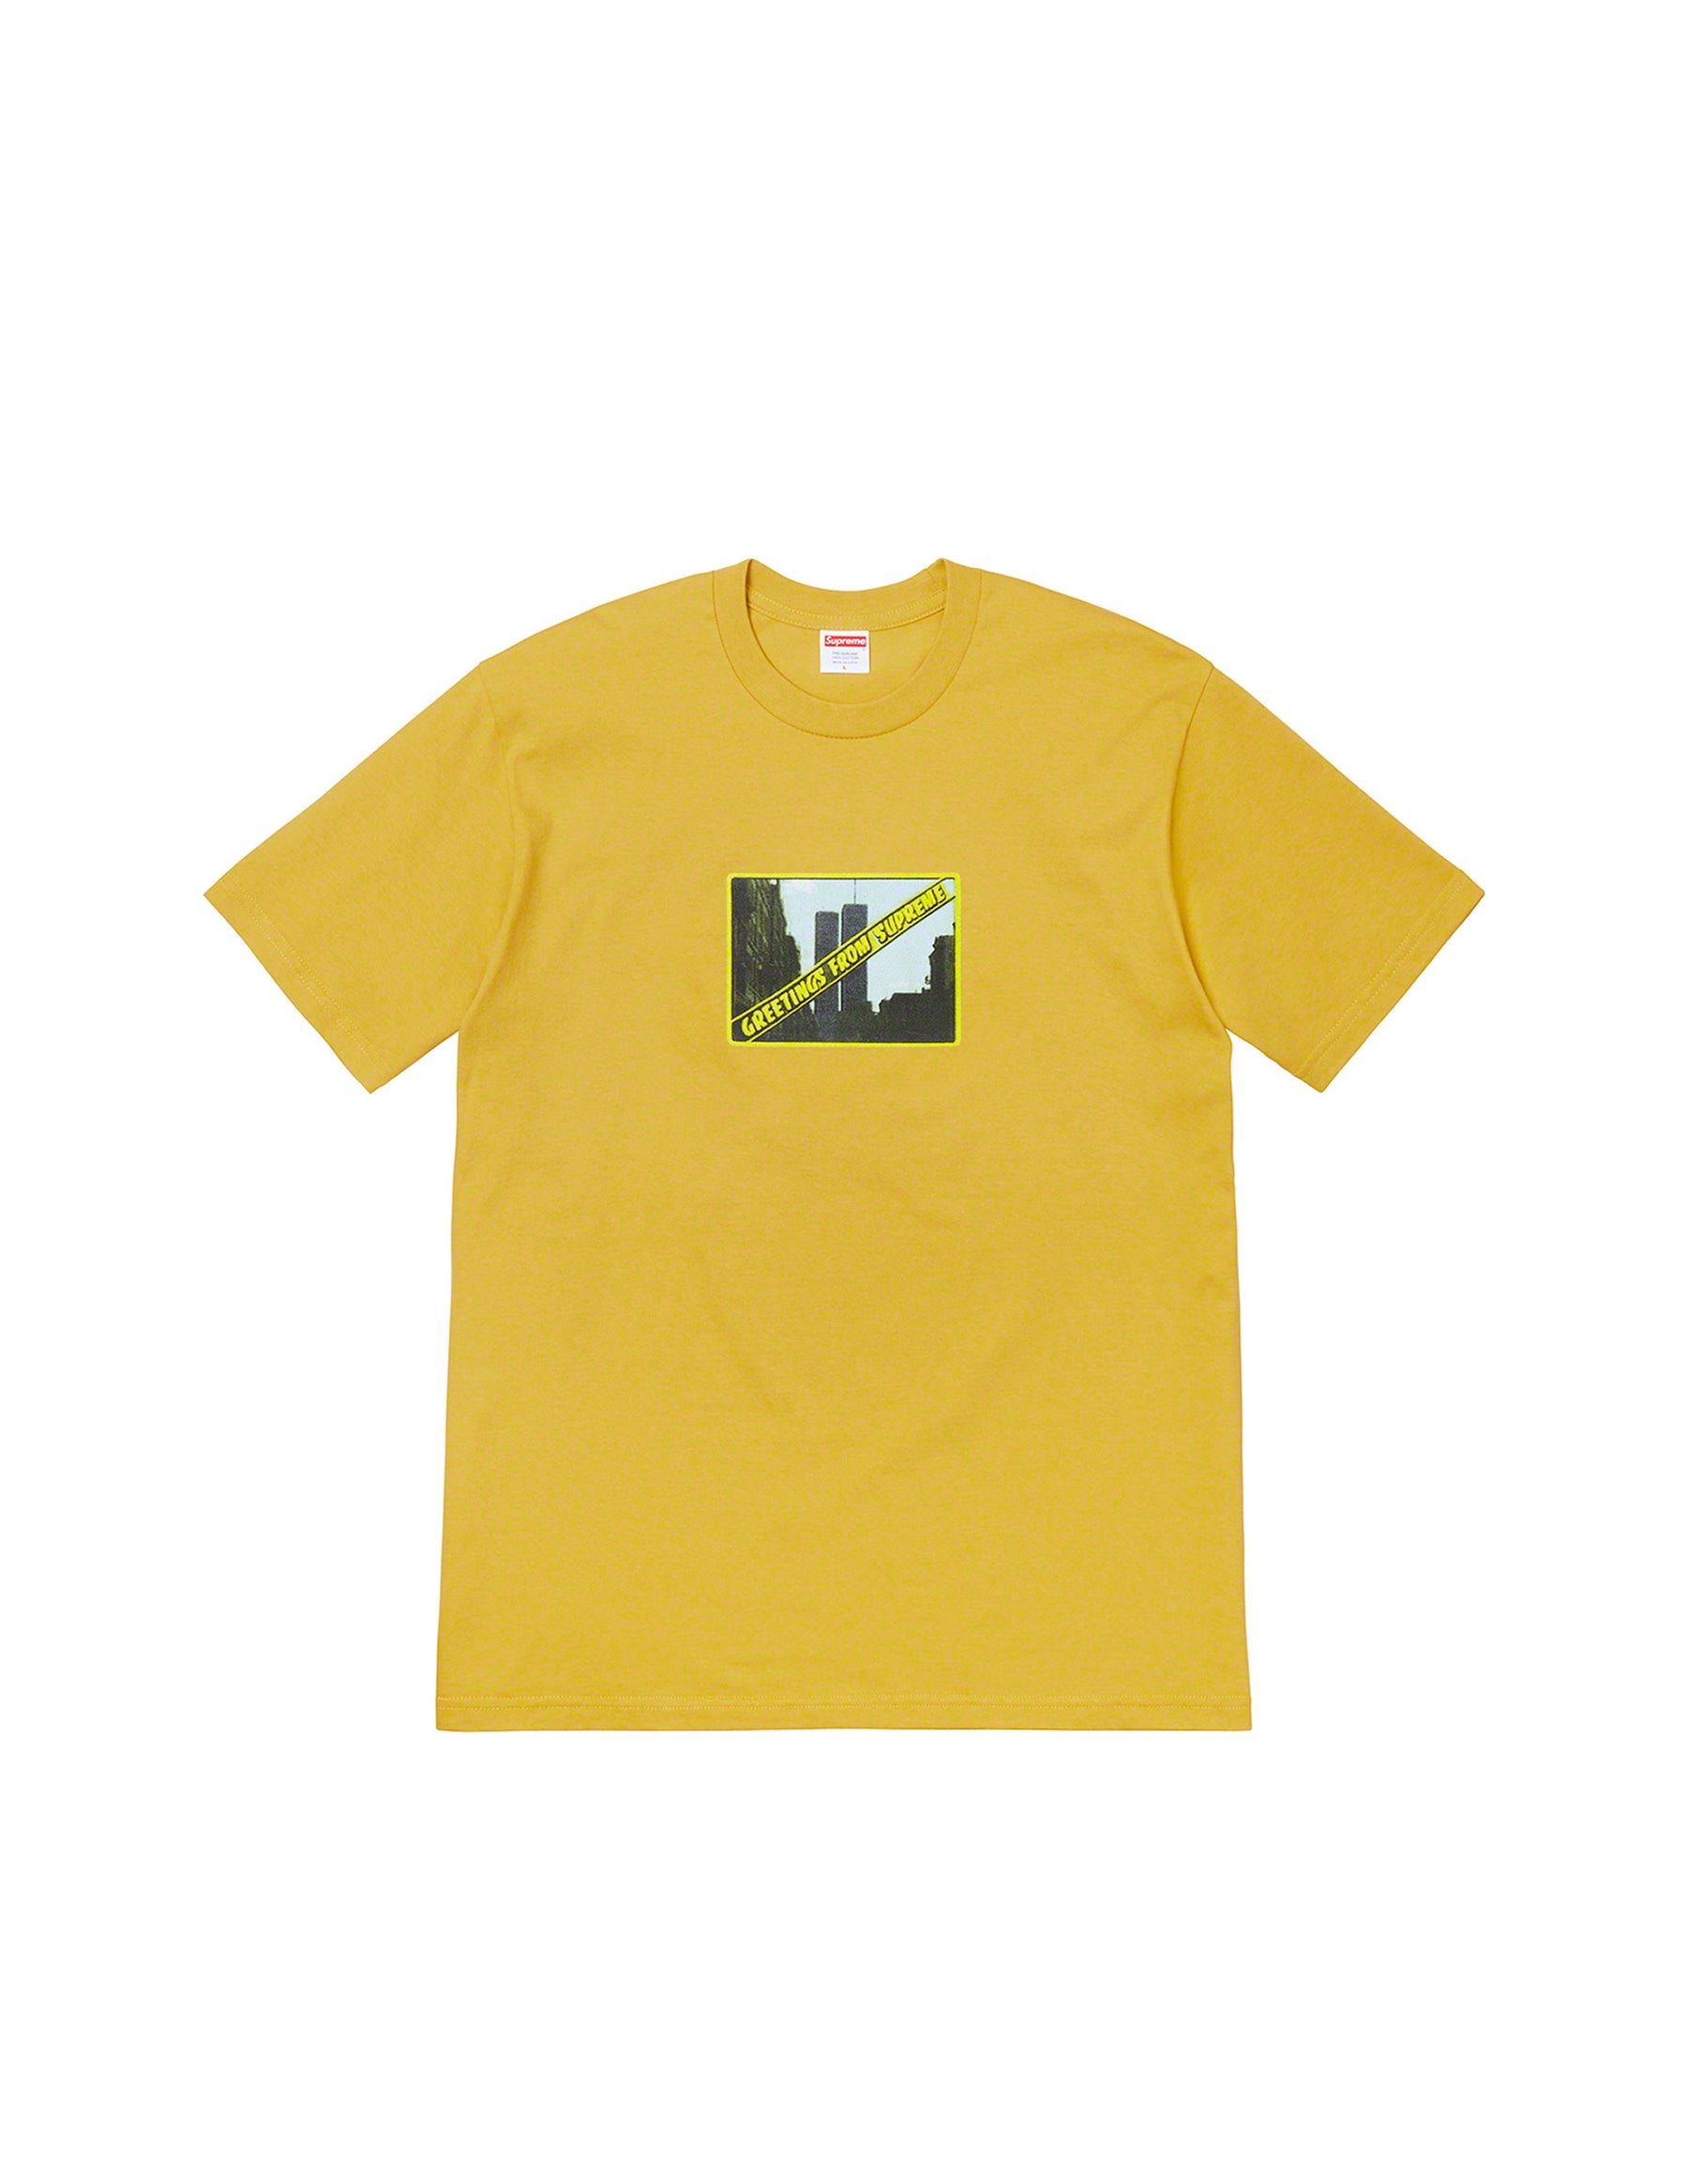 Supreme "Greetings From NY" Yellow Tee